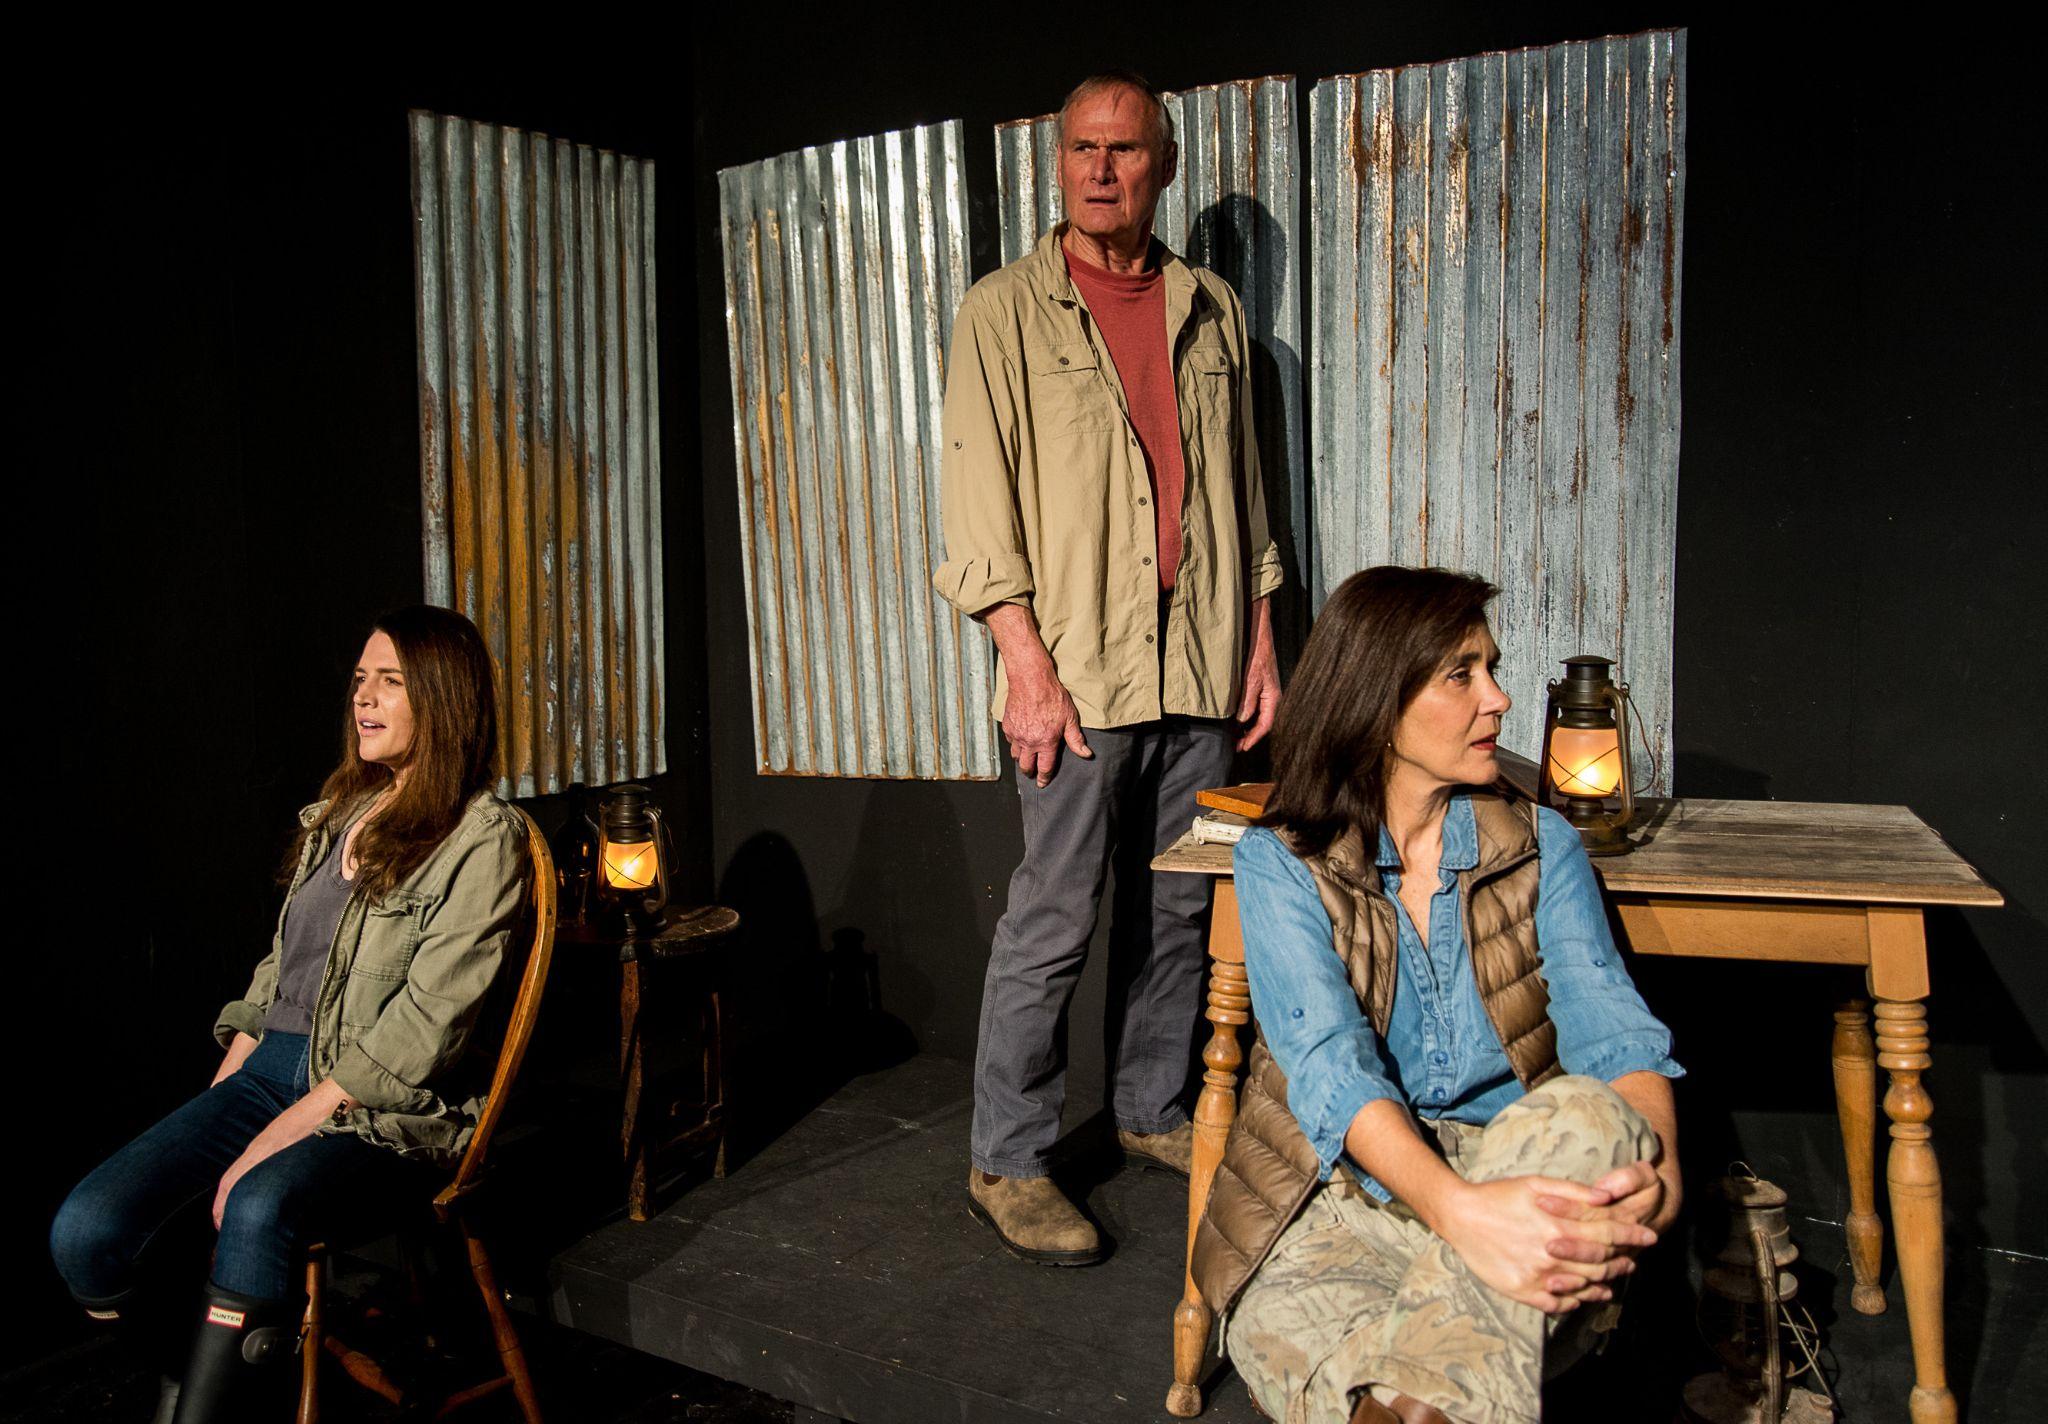 Press Photo from Haunting Play, THE RIVER at Live Arts: three people on stage with tables and lanterns